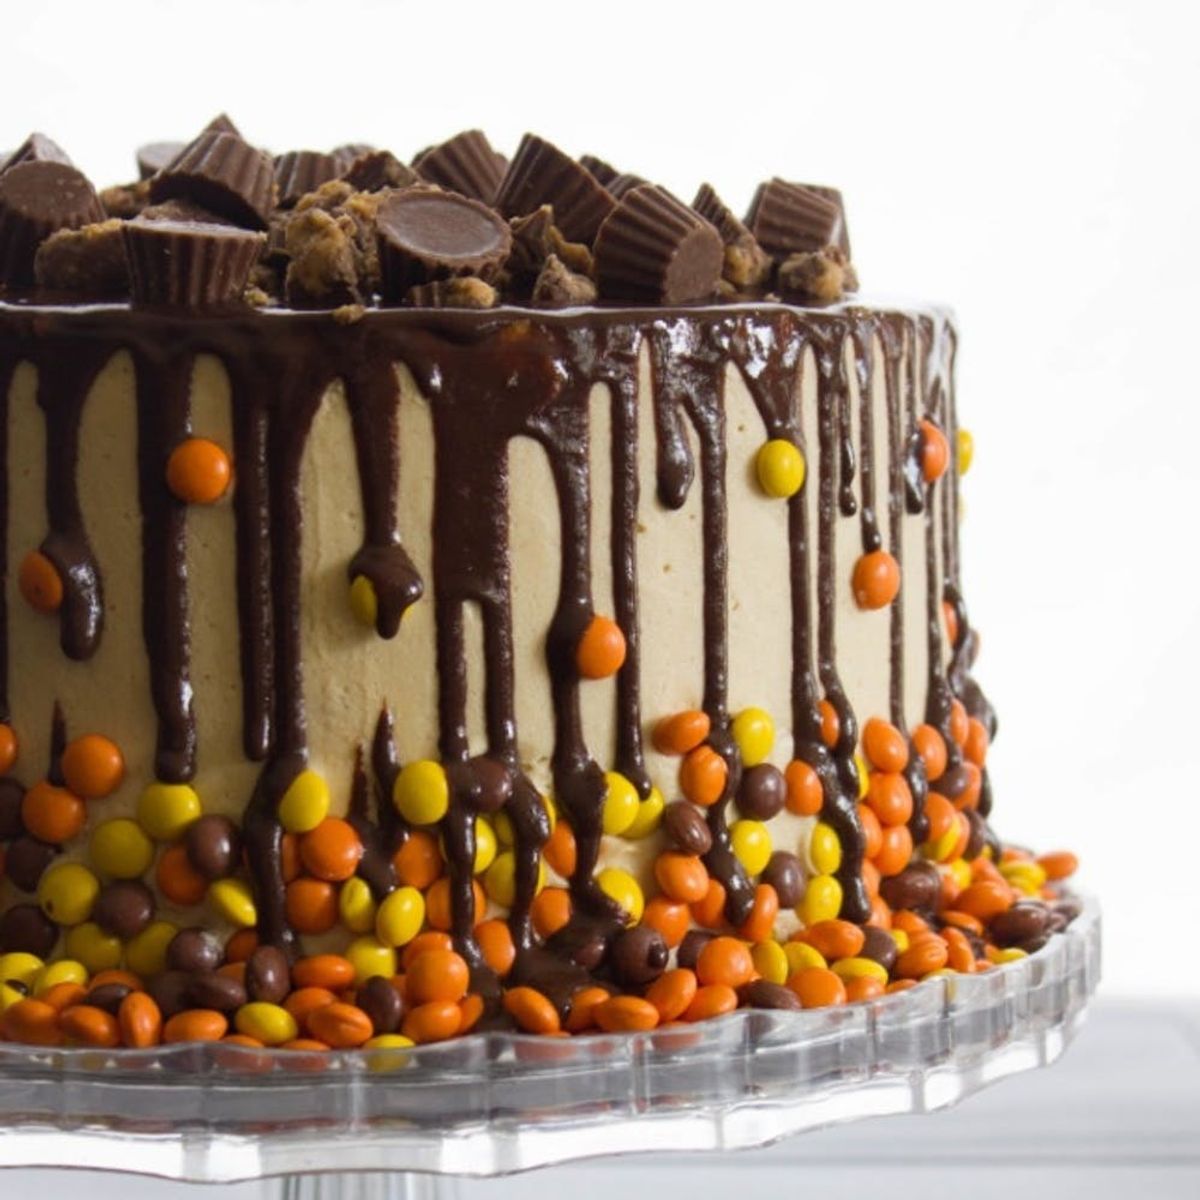 17 Halloween Cake Recipes Perfect for Any Spooky Occasion